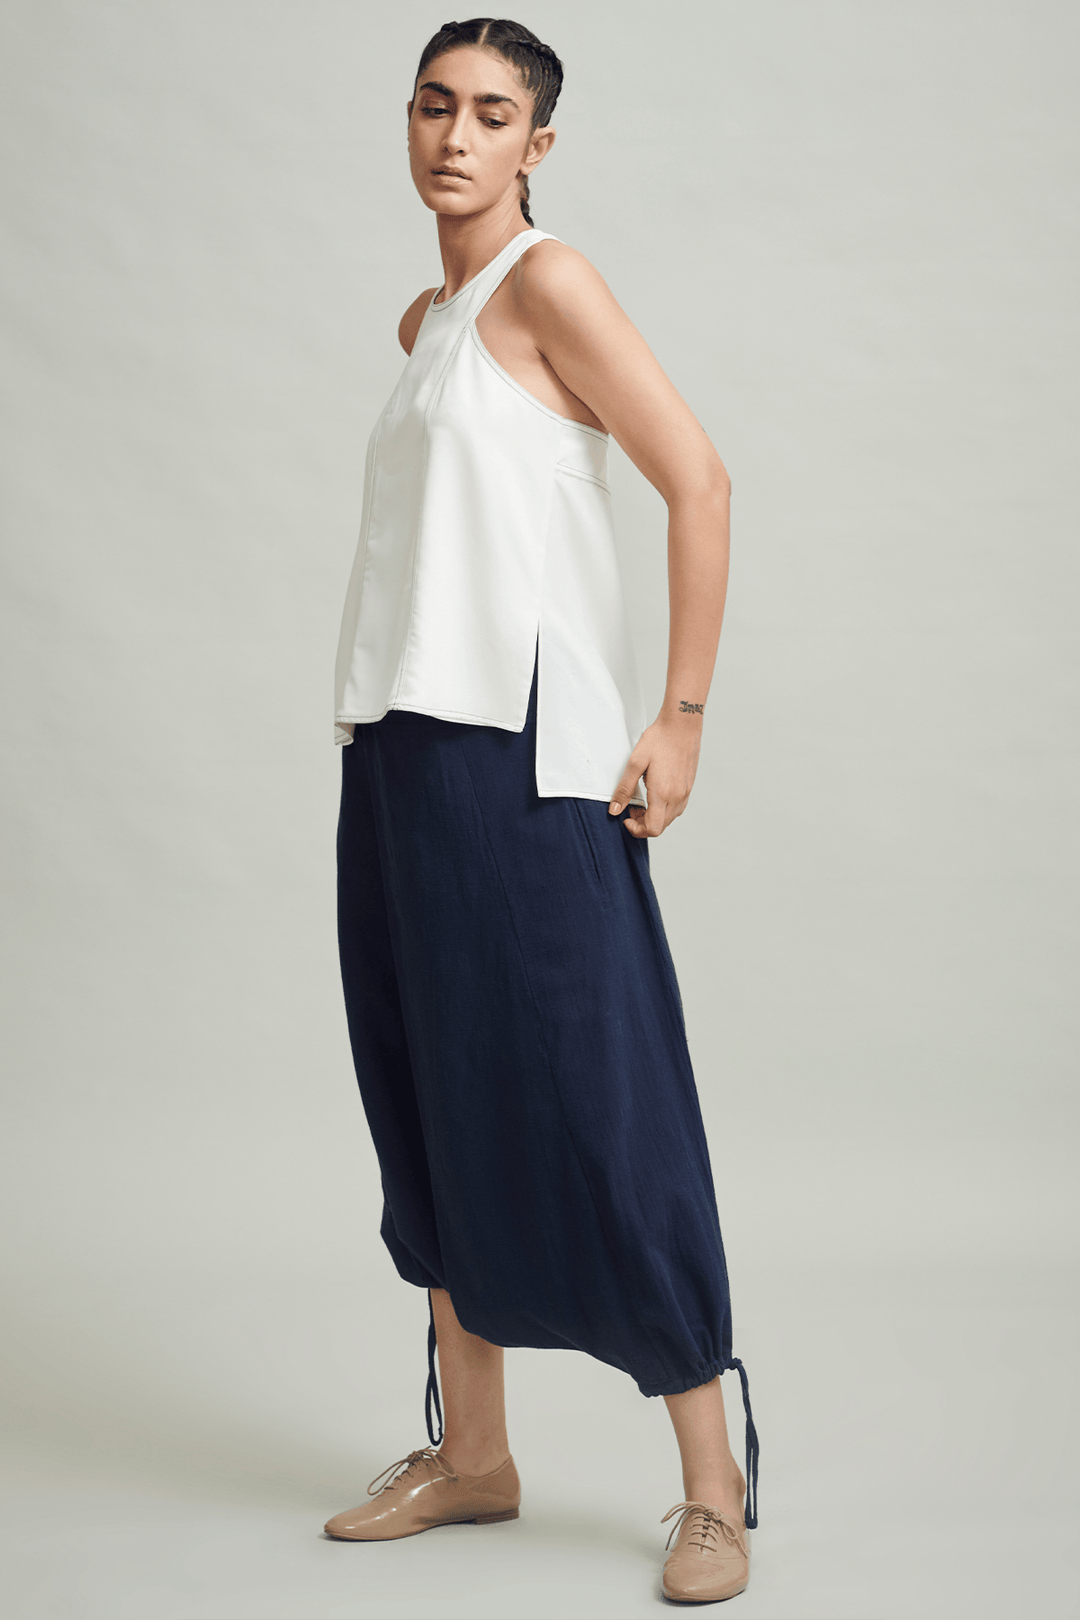 Contrast Stitch Top, a product by Dash & Dot